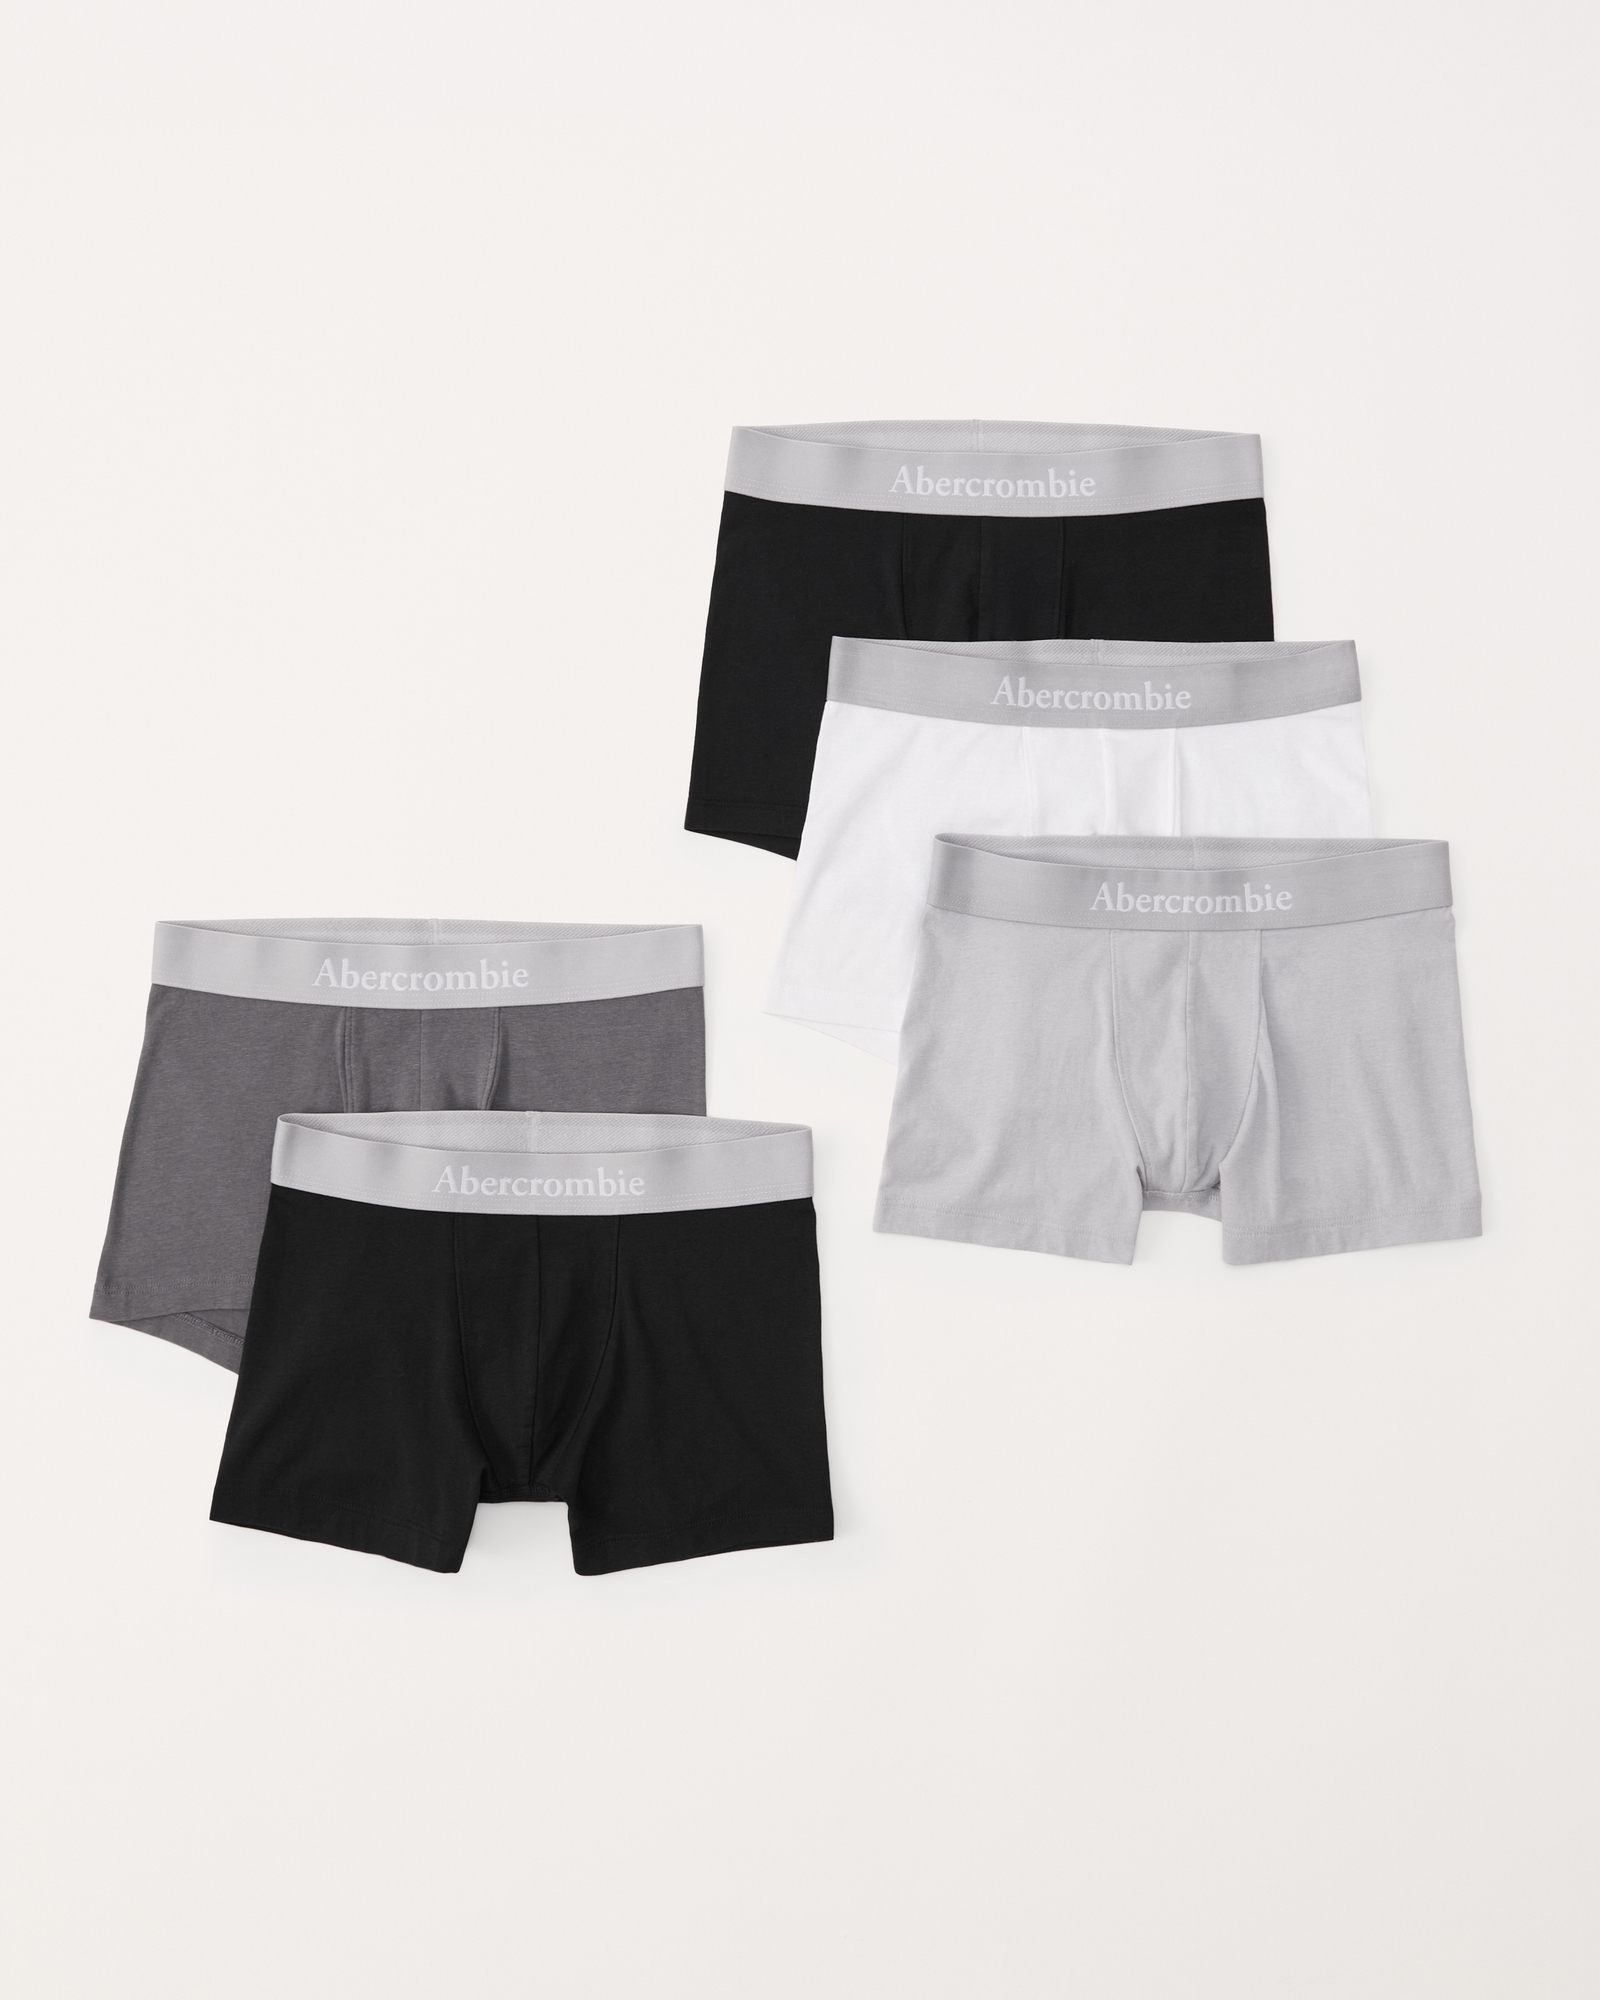 Buy Boxers PRIMARK, Nice childrens clothing from KidsMall - 109534